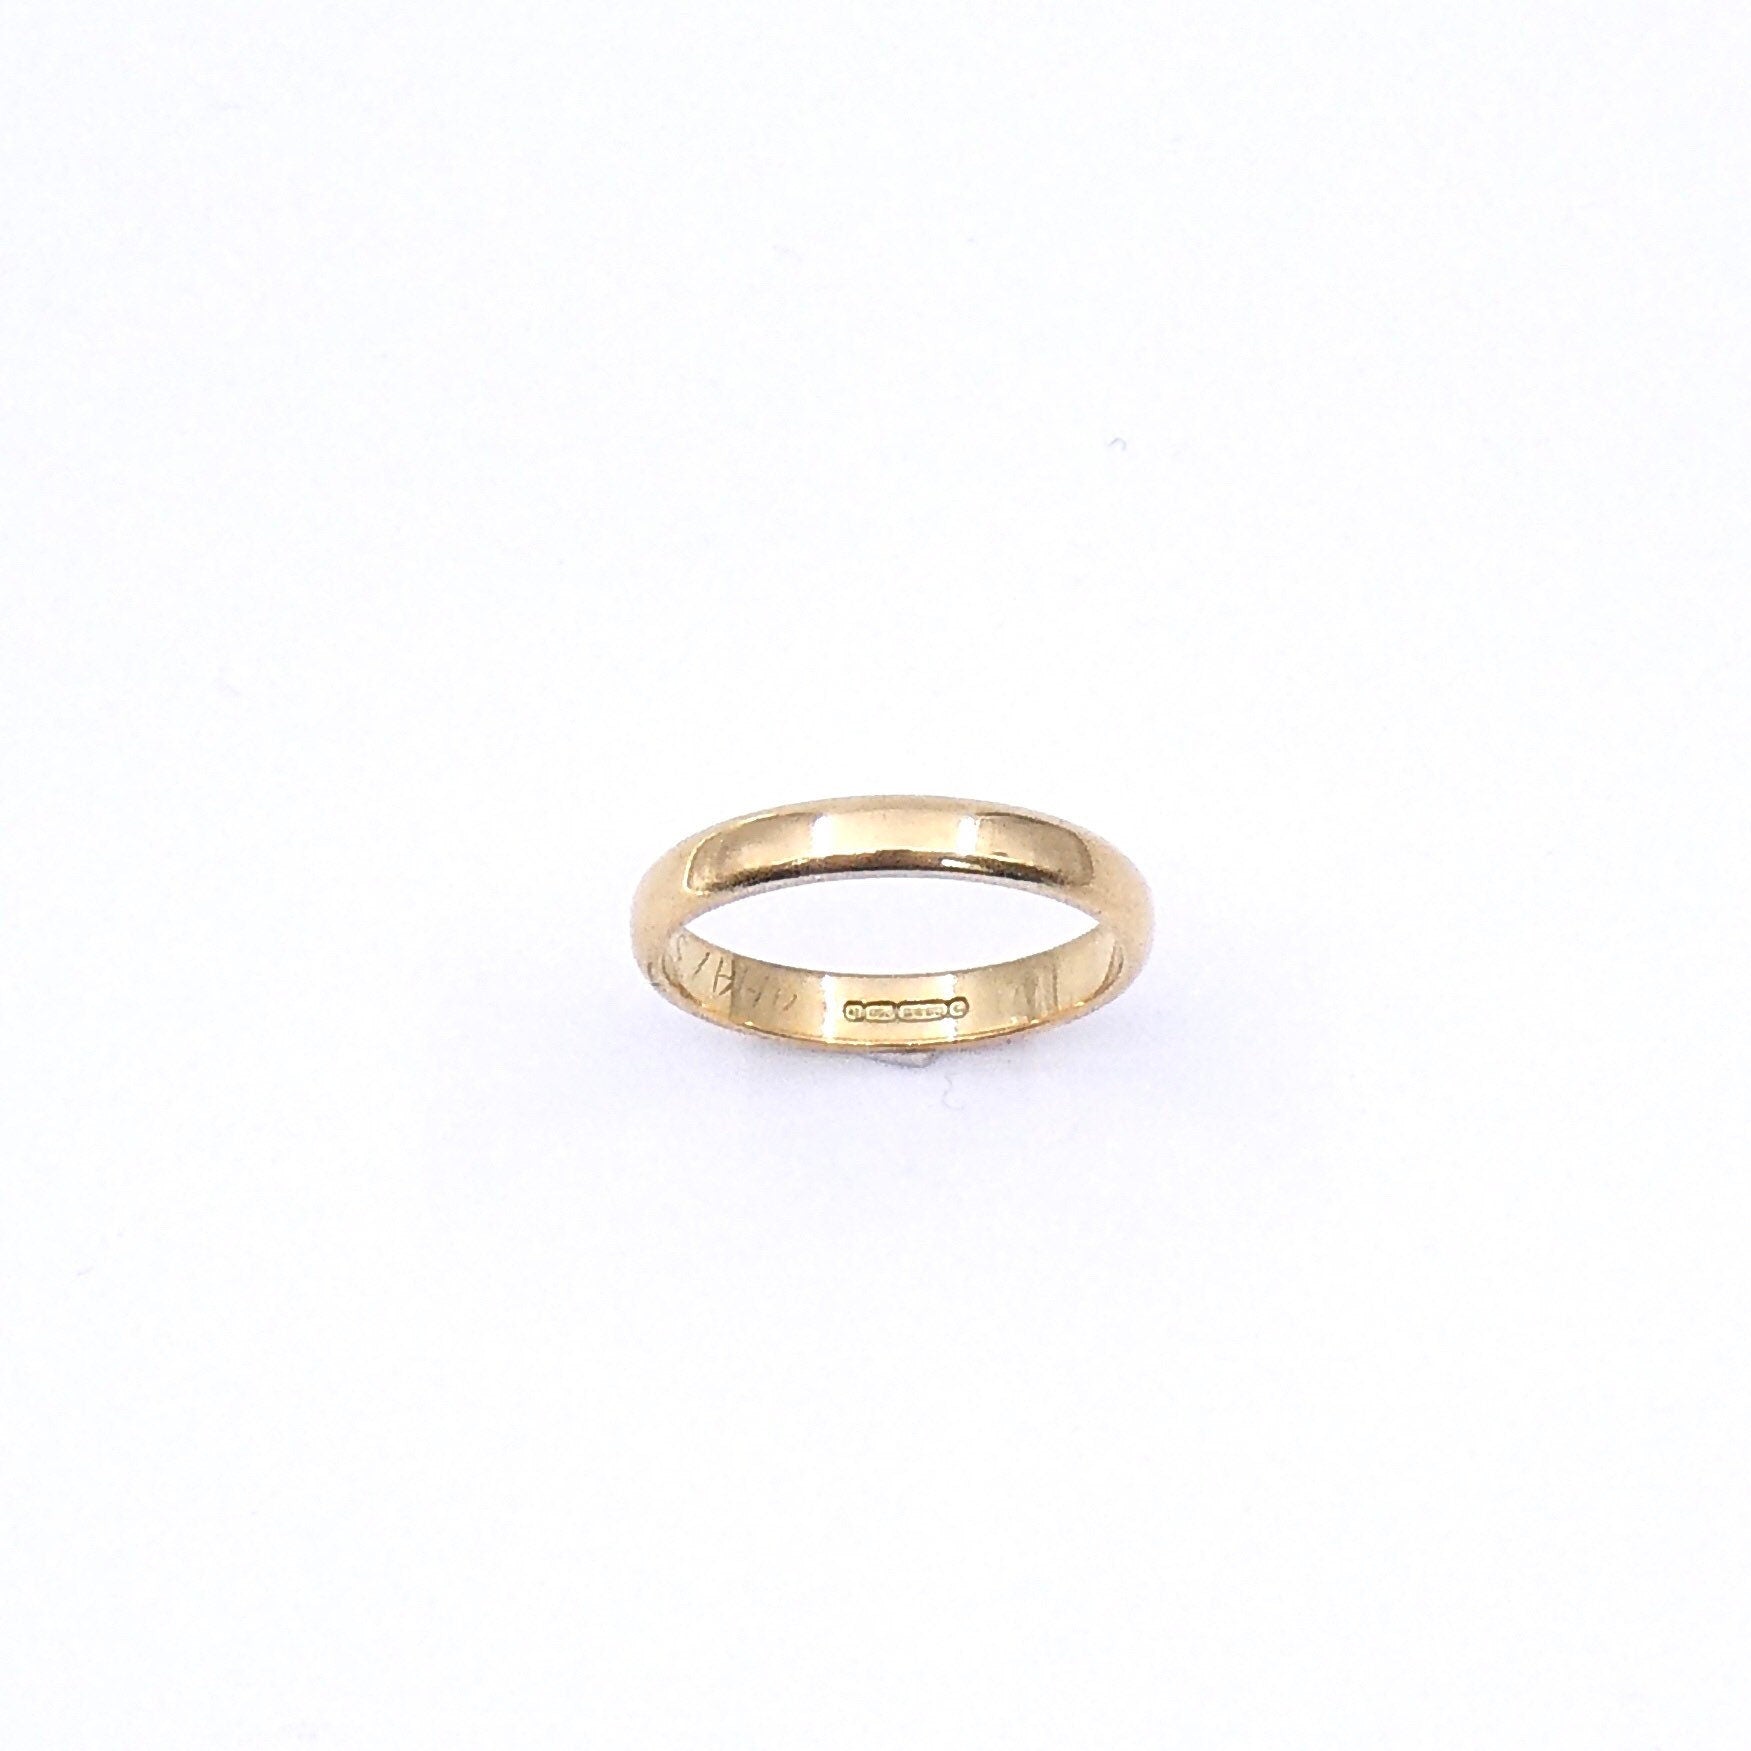 Vintage gold band, a heavy 18kt gold ring, ideal vintage wedding ring. - Collected